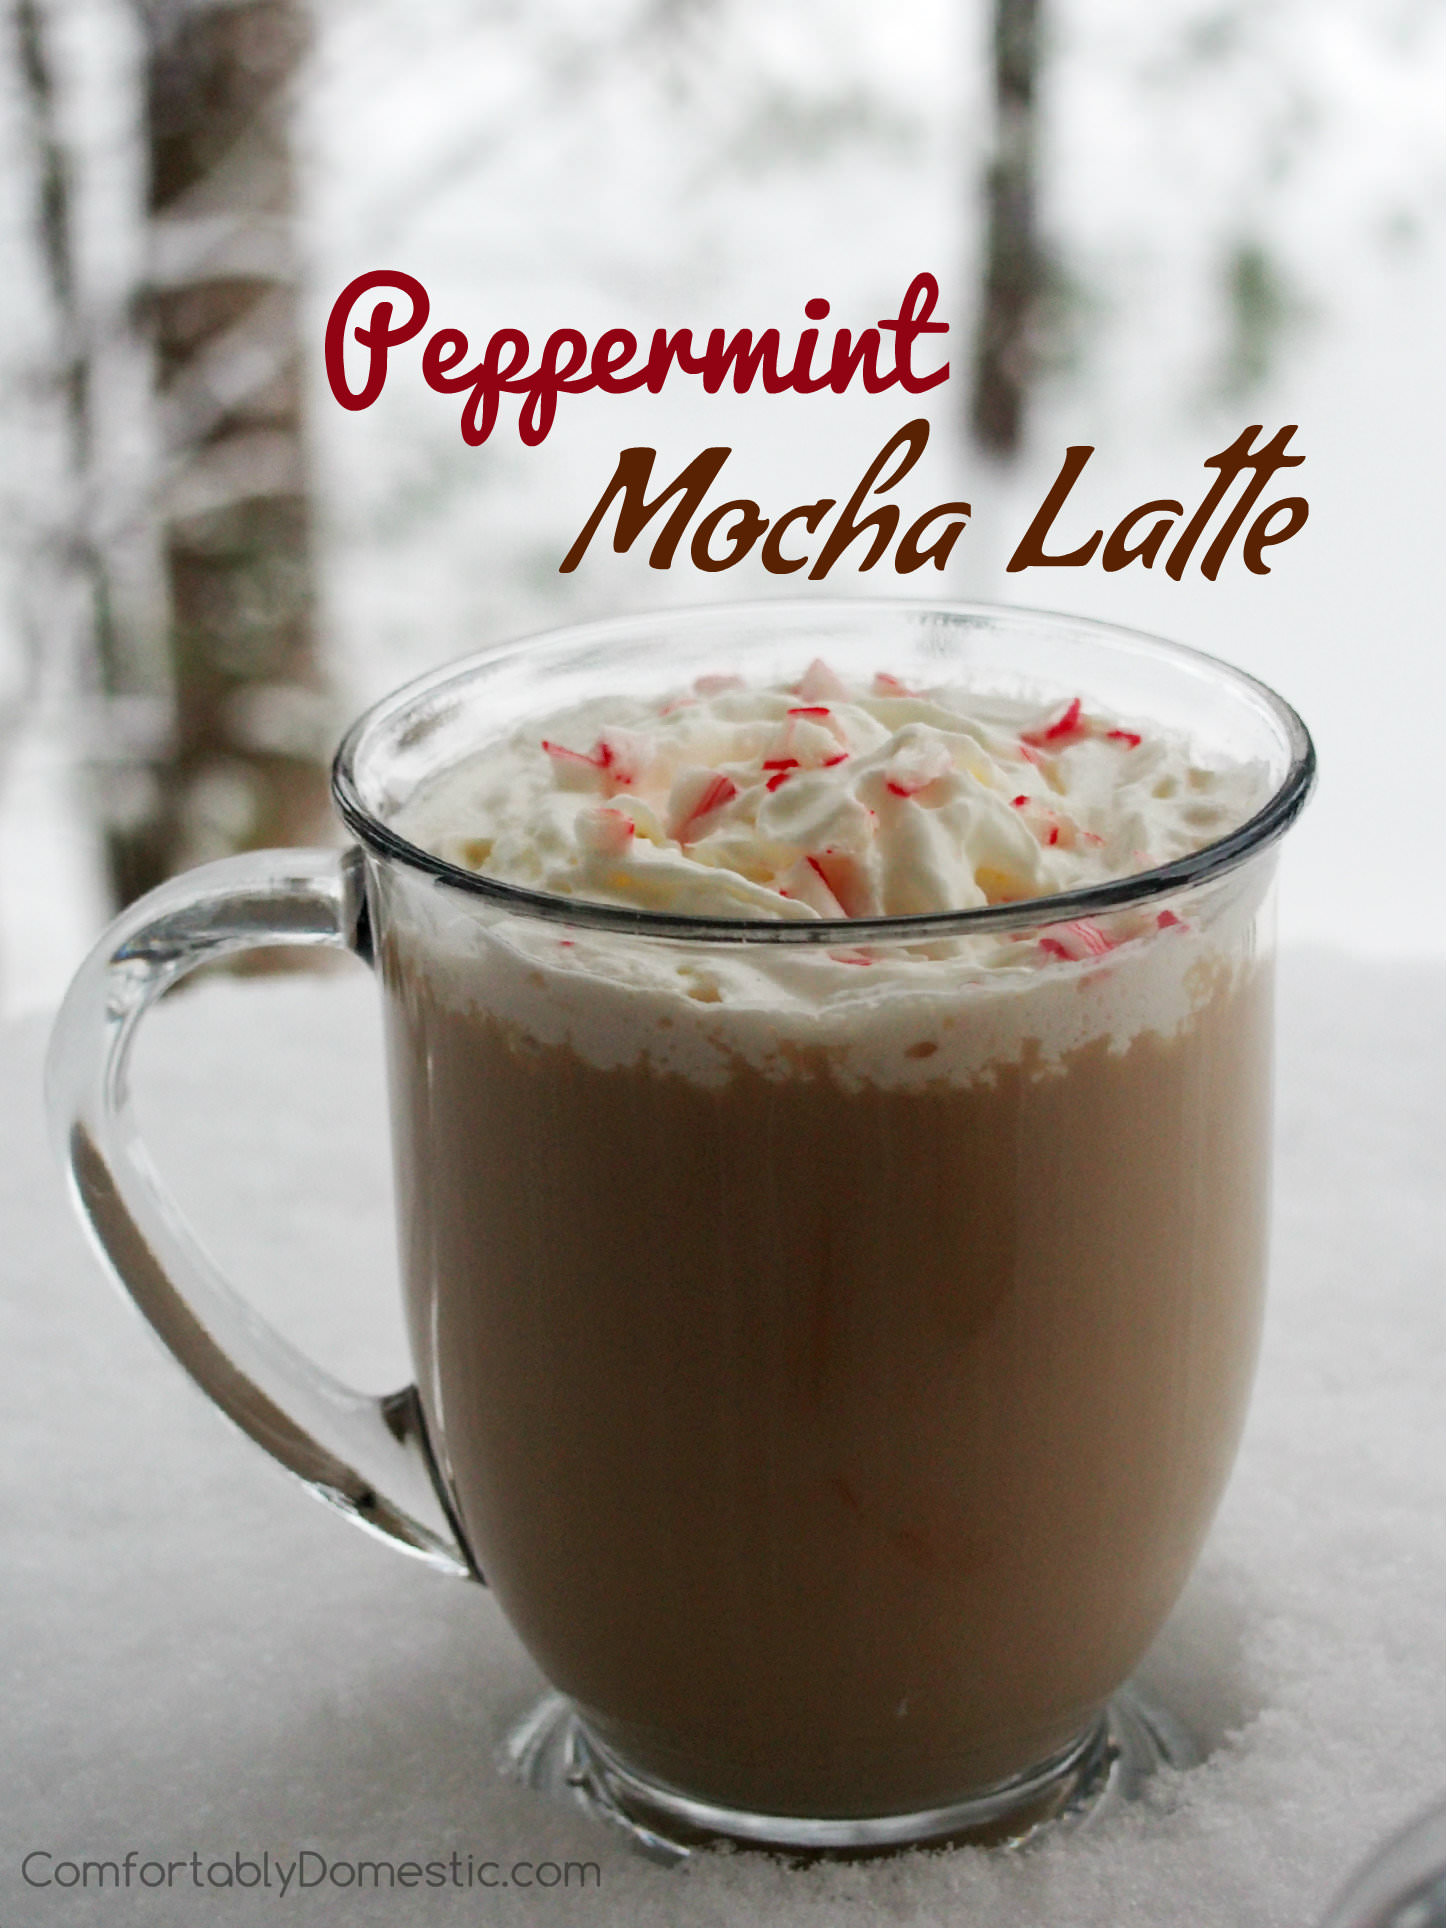 Peppermint Mocha Latte and Skinny Peppermint Mocha Latte - Strongly brewed coffee is tempered with brisk peppermint, rich chocolate, and creamy milk make for a deliciously decadent sipper at home for fraction of the fancy coffee shop price.| ComfortablyDomestic.com